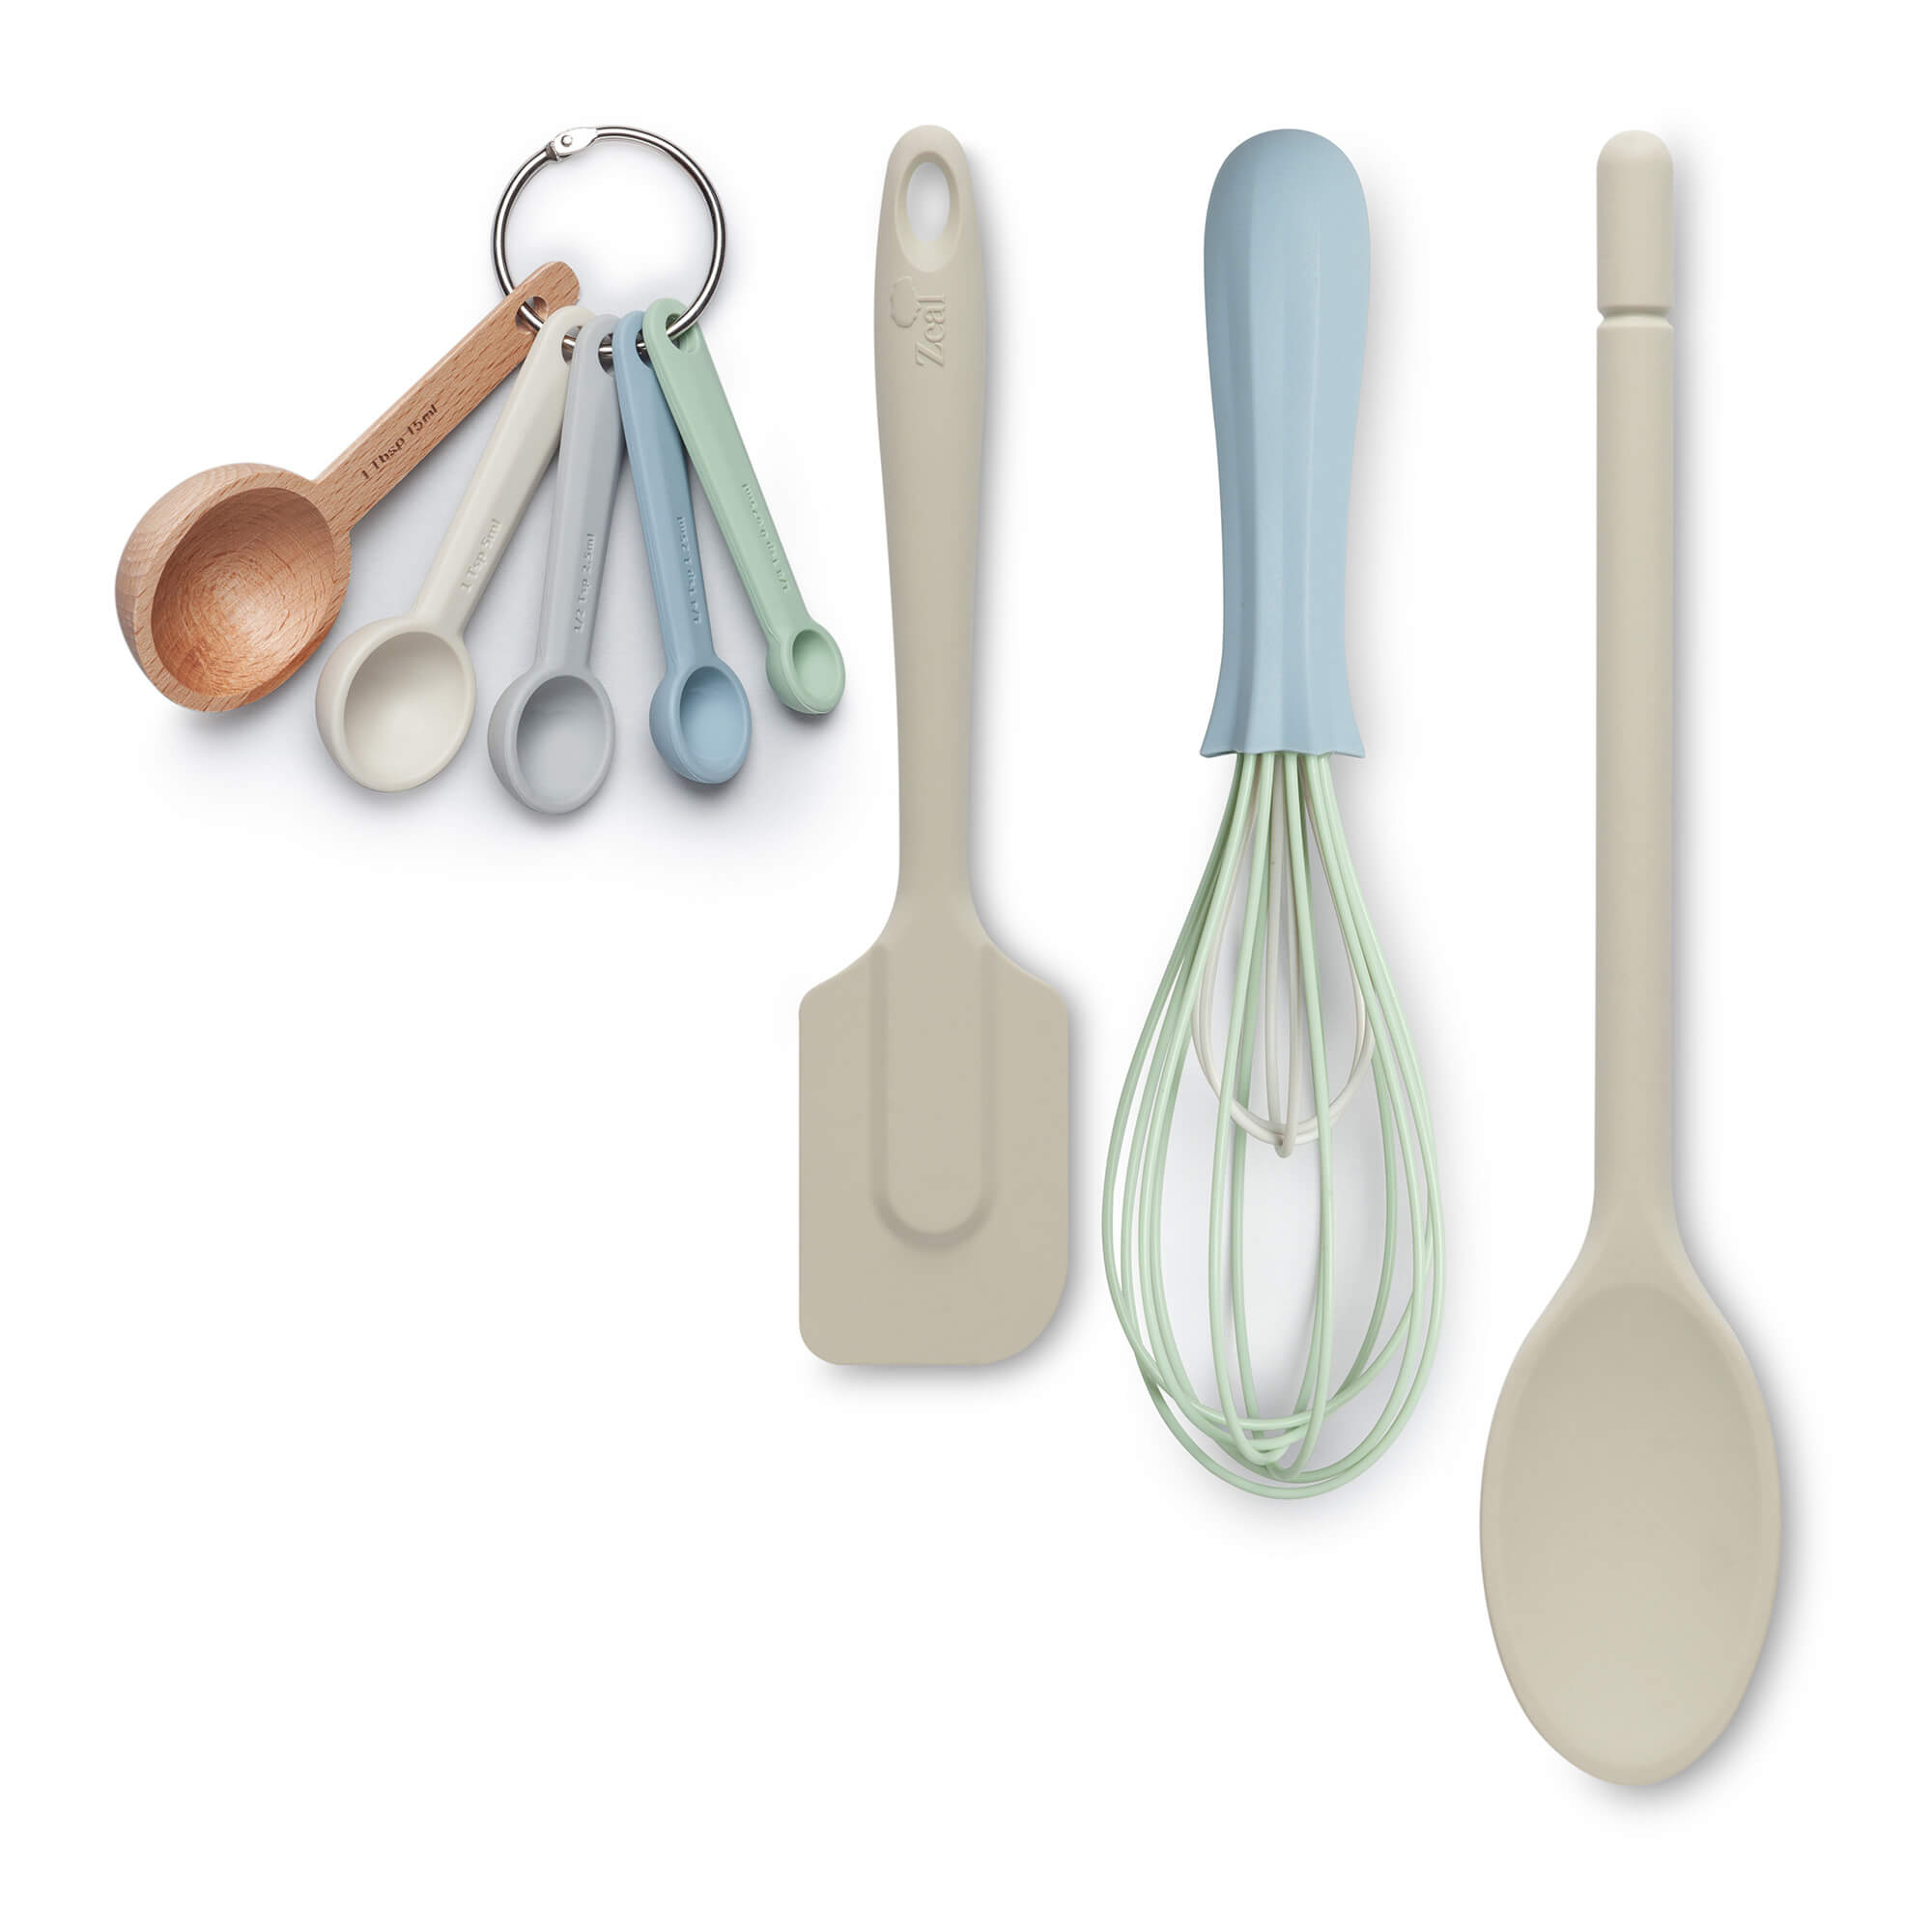 Zeal Silicone Measuring Spoons, Spatula, Traditional Spoon & Whisk Set in Cream